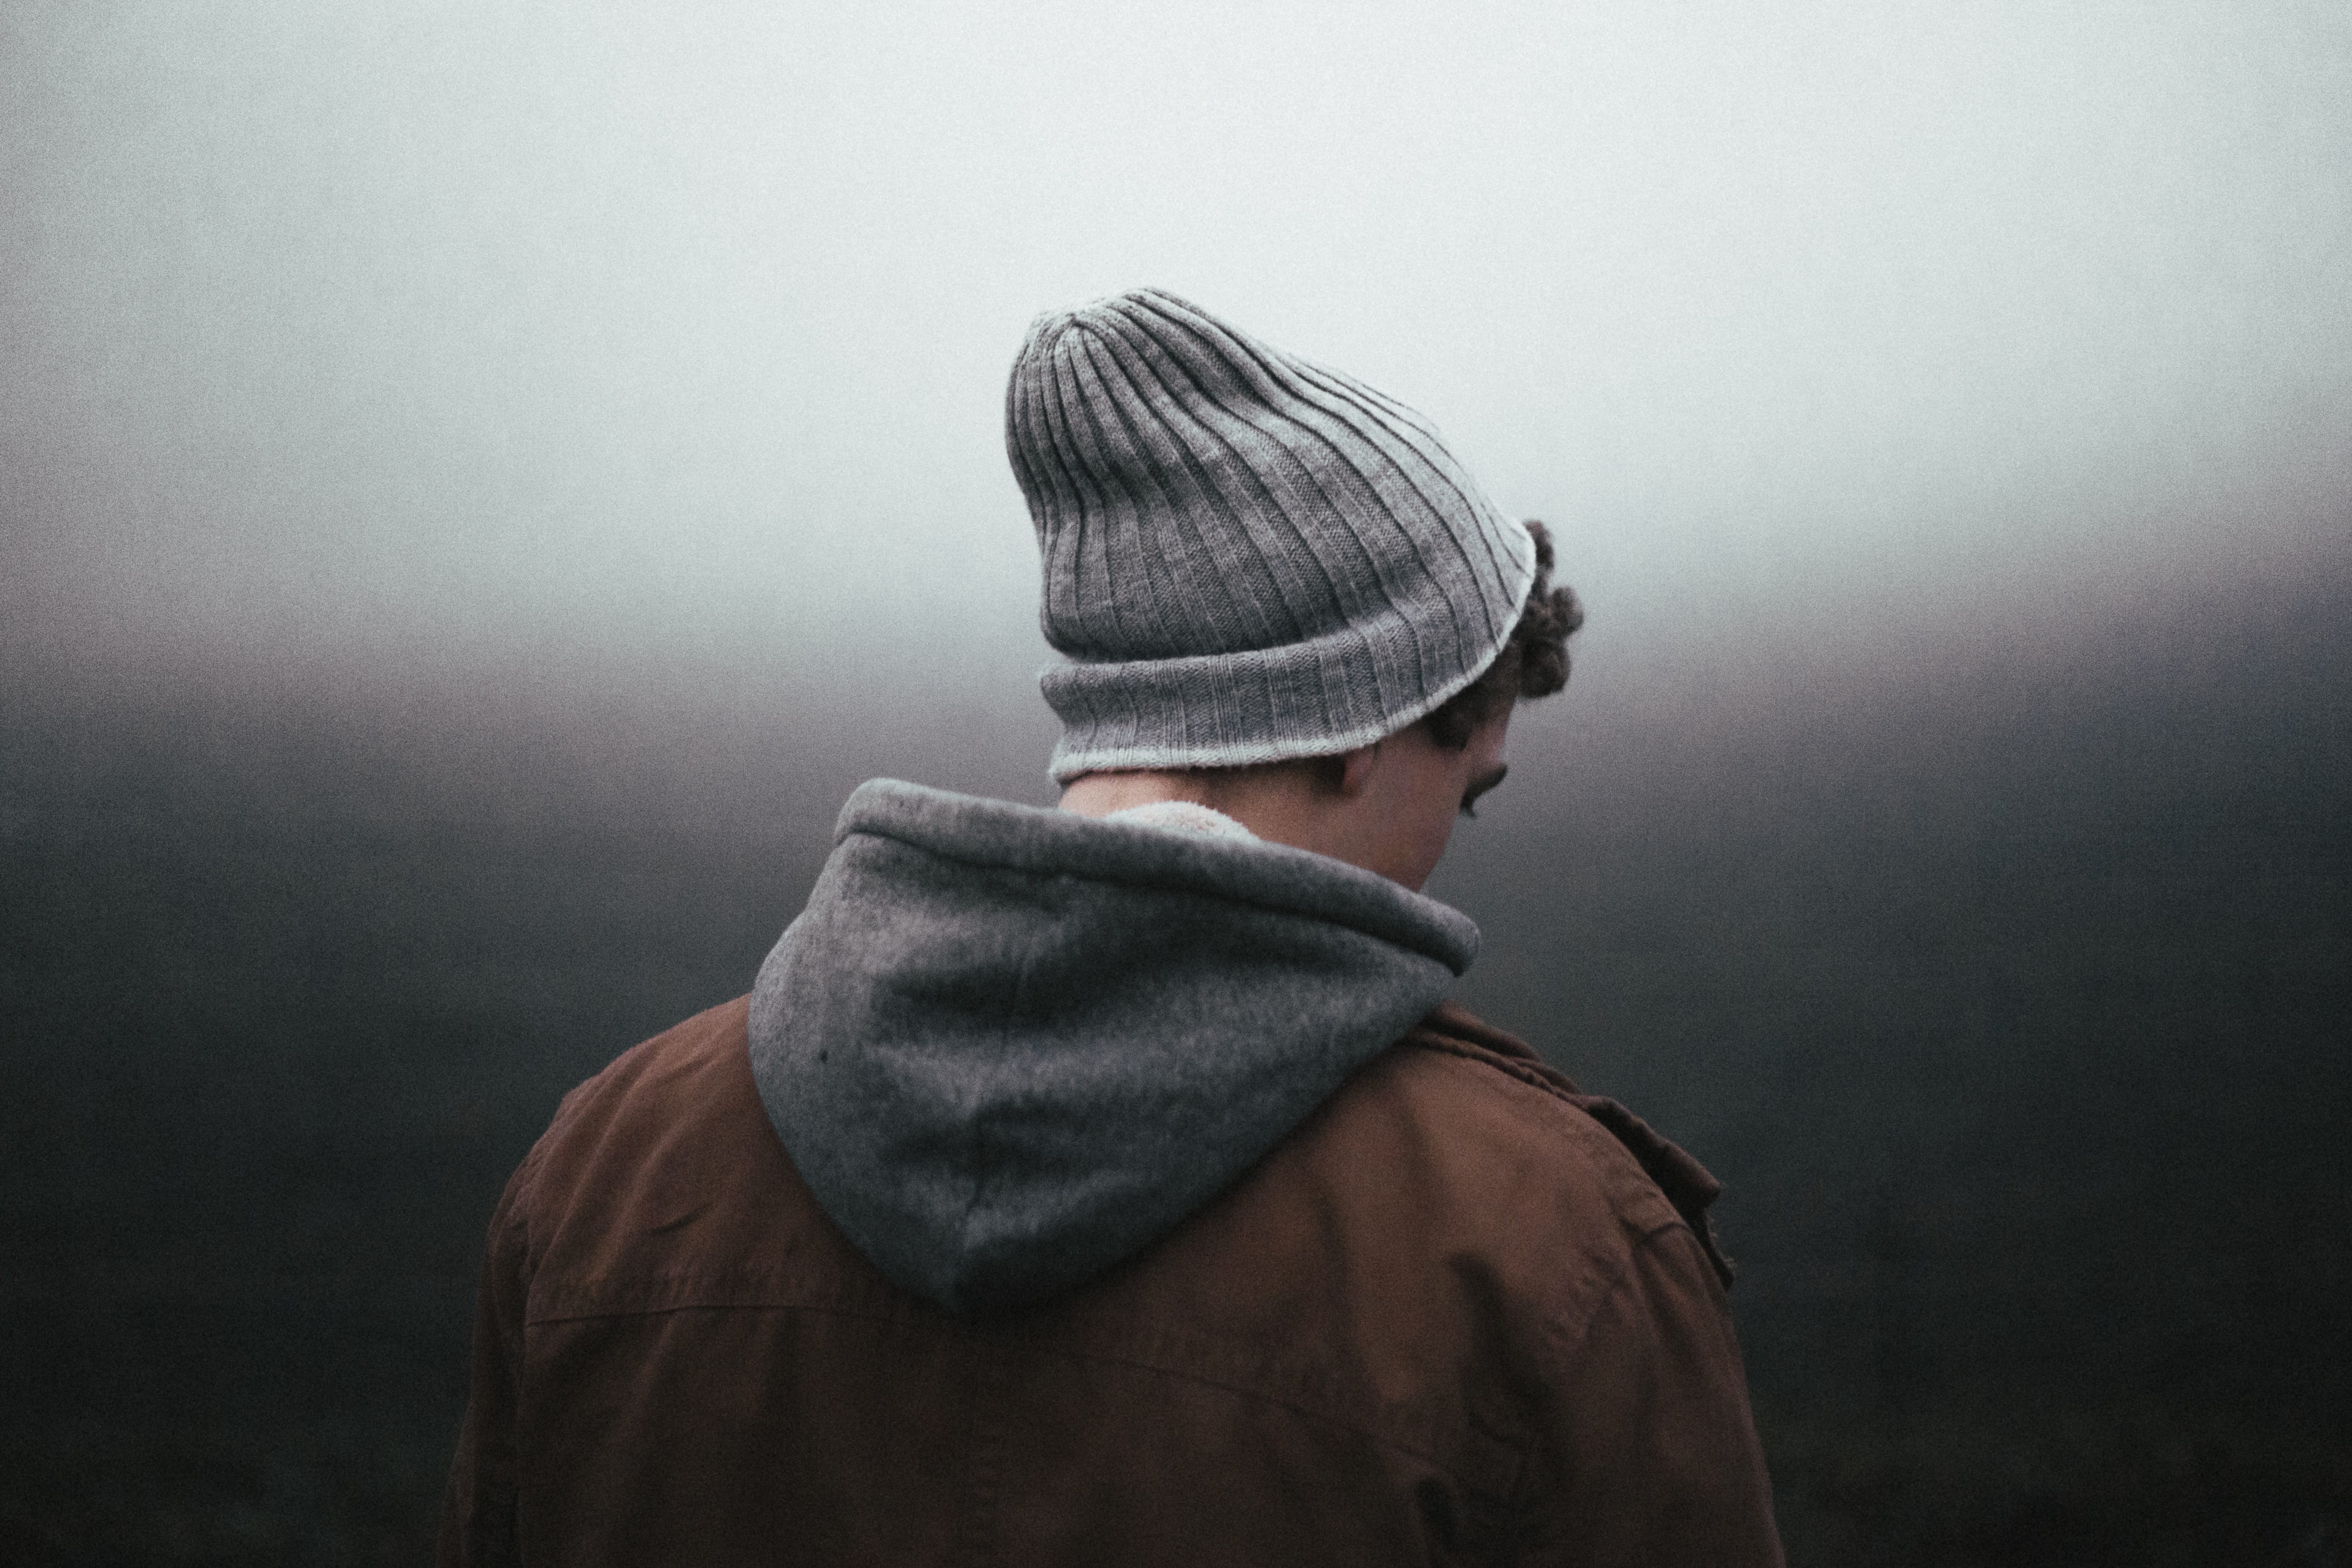 Young man wearing knit cap, turned with back to camera; image by Andrew Neel, via Unsplash.com.